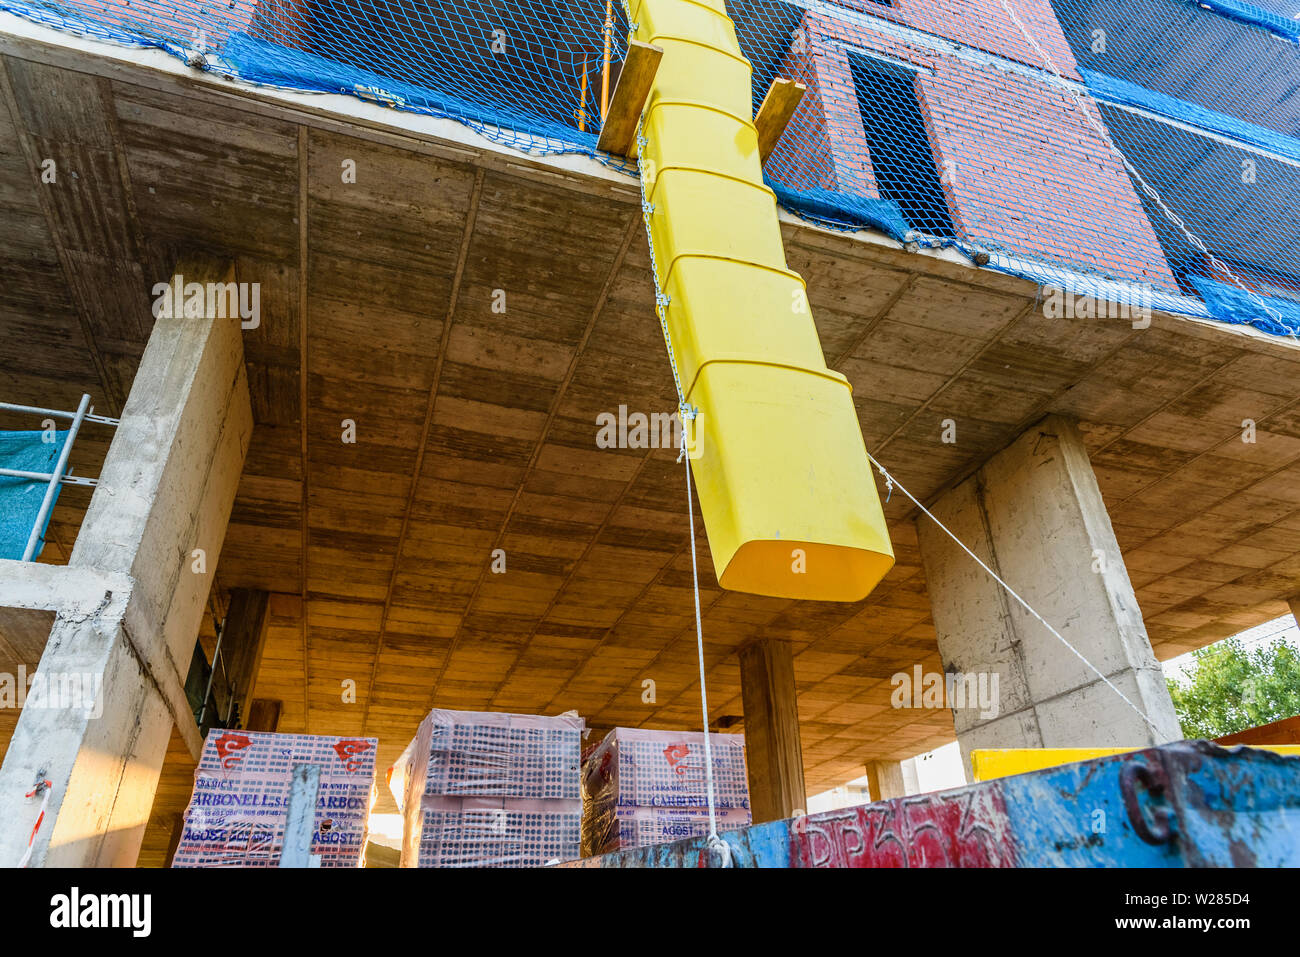 Valencia, Spain - July 3, 2019: Pipes to throw  debris into a construction site. Stock Photo